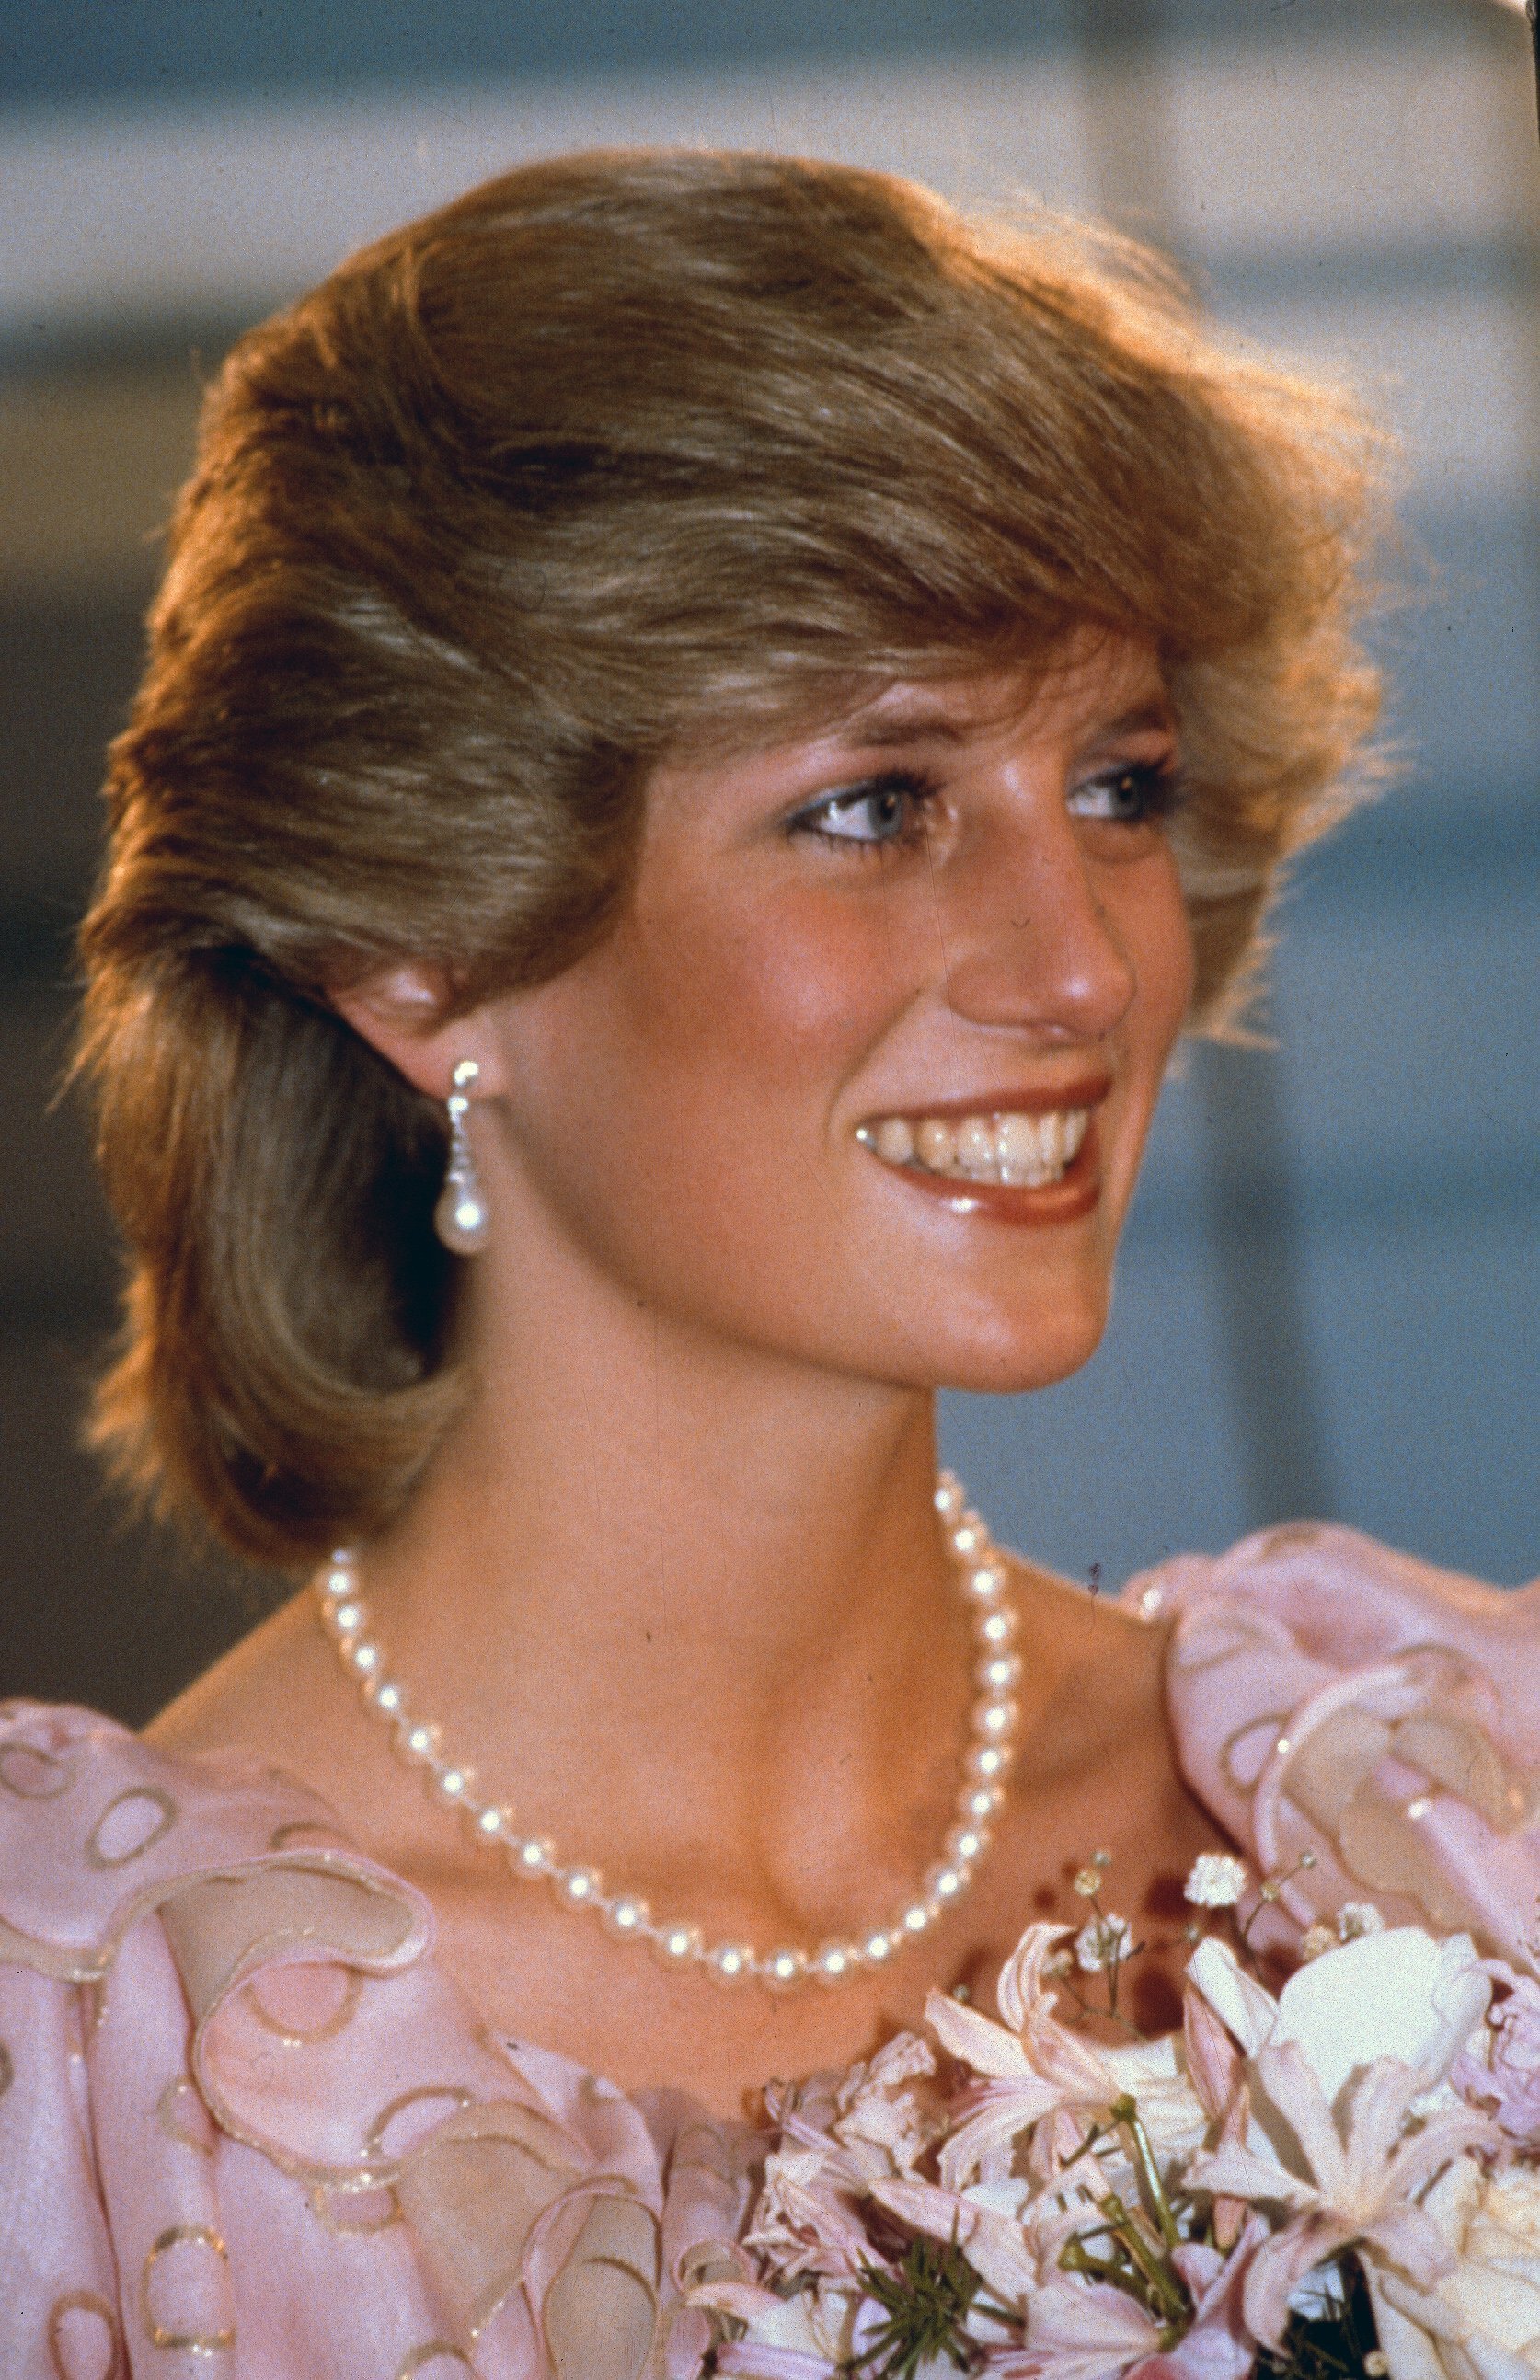 Princess Diana on April 14, 1983, in Melbourne, Australia | Source: Getty Images